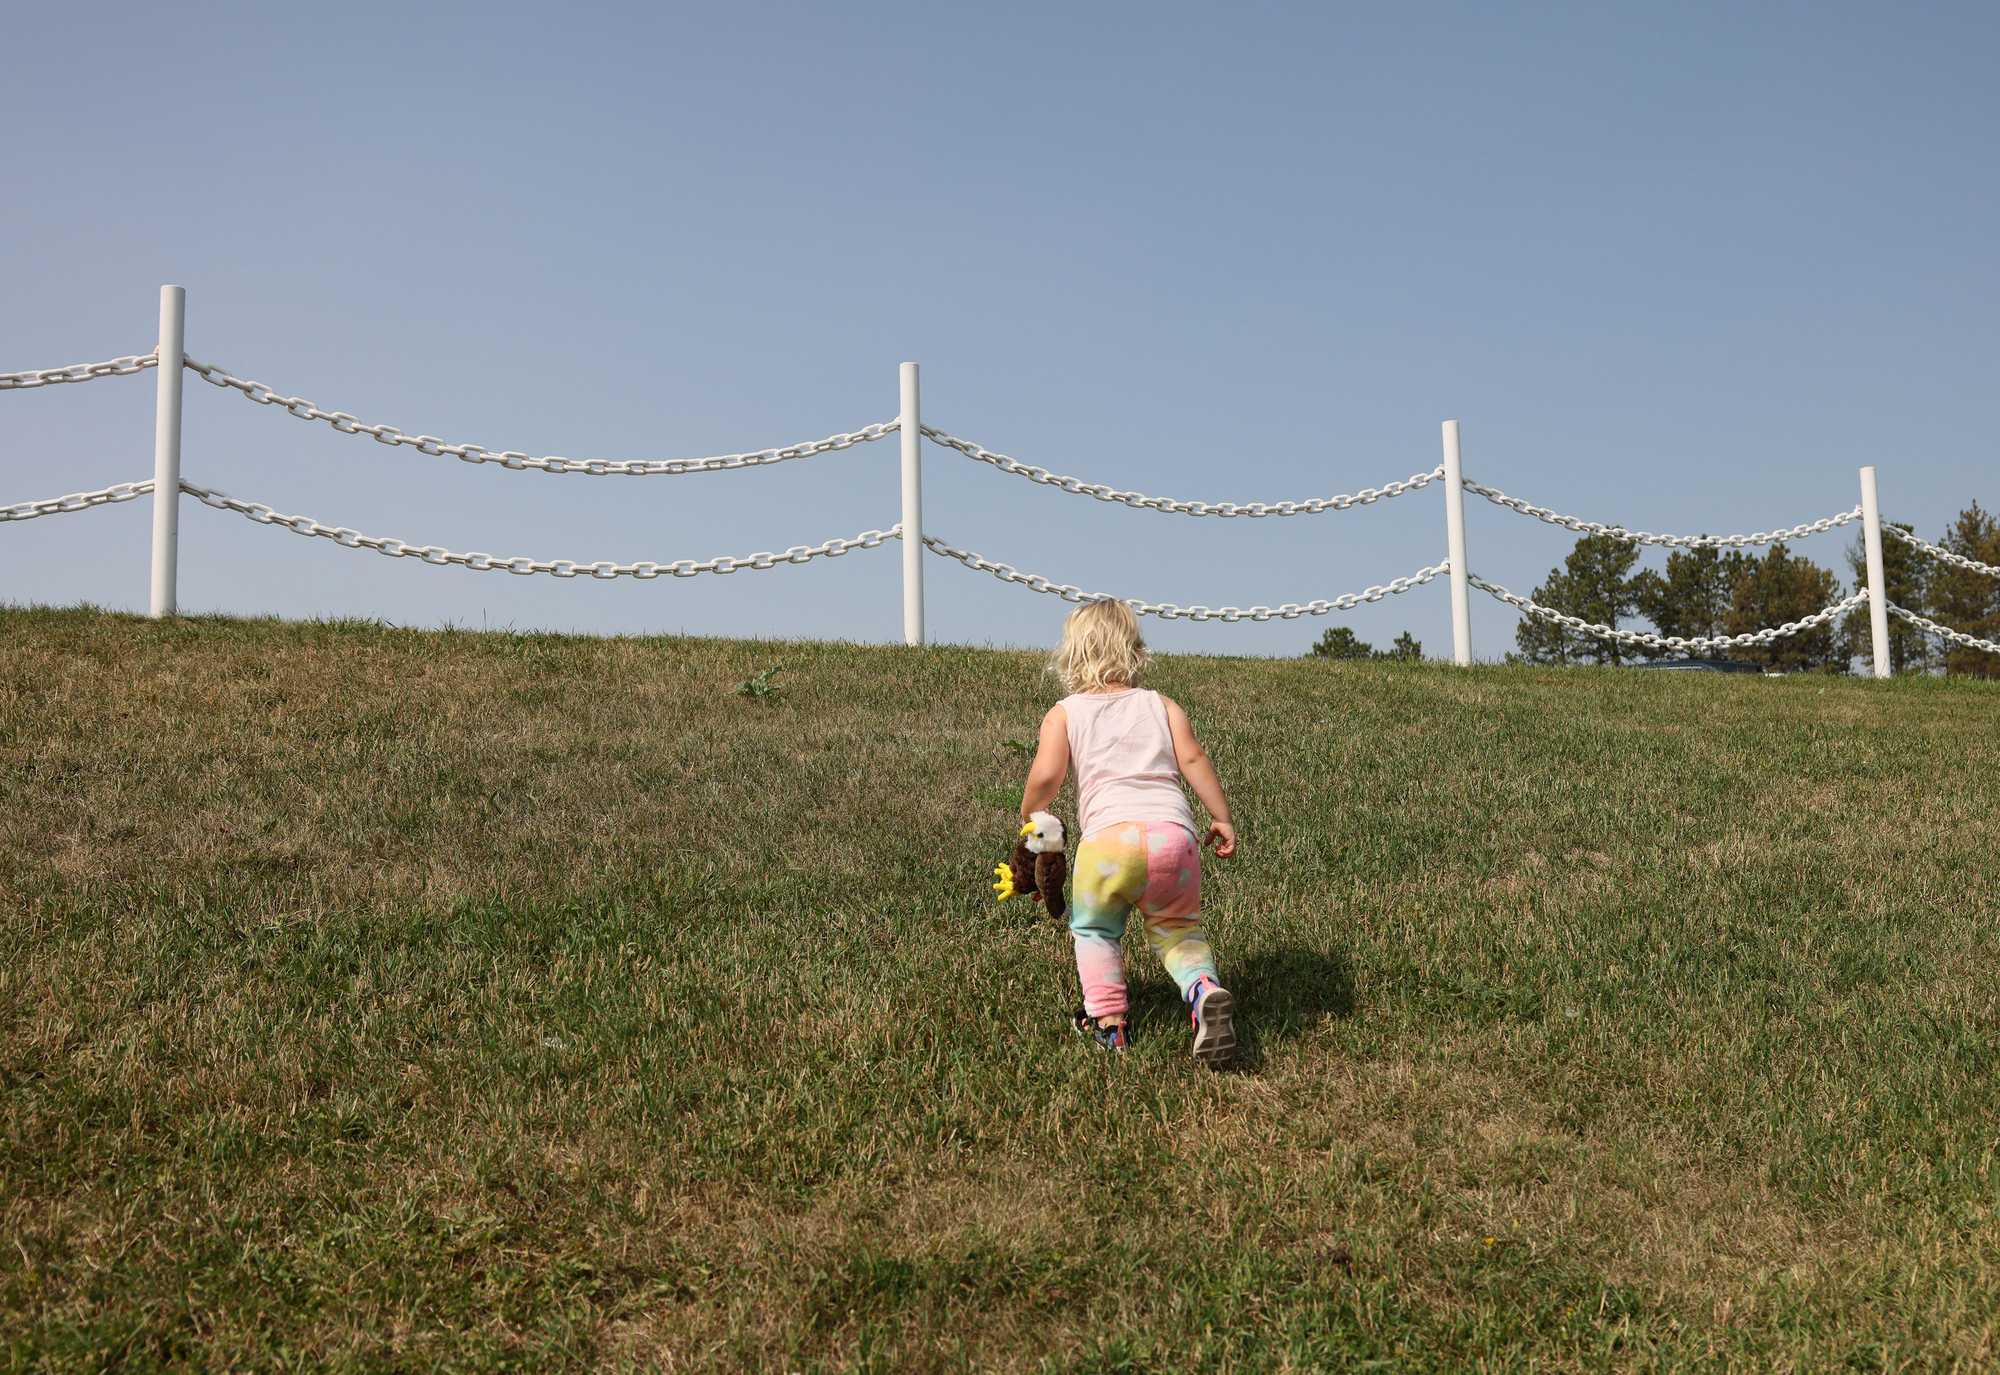 Abigail Pope, 2, made her way up the hill as she and her family arrived at the memorial to the Oglala Lakota warrior, who is famous for his role in the defeat of Custer at the Battle of the Little Bighorn.